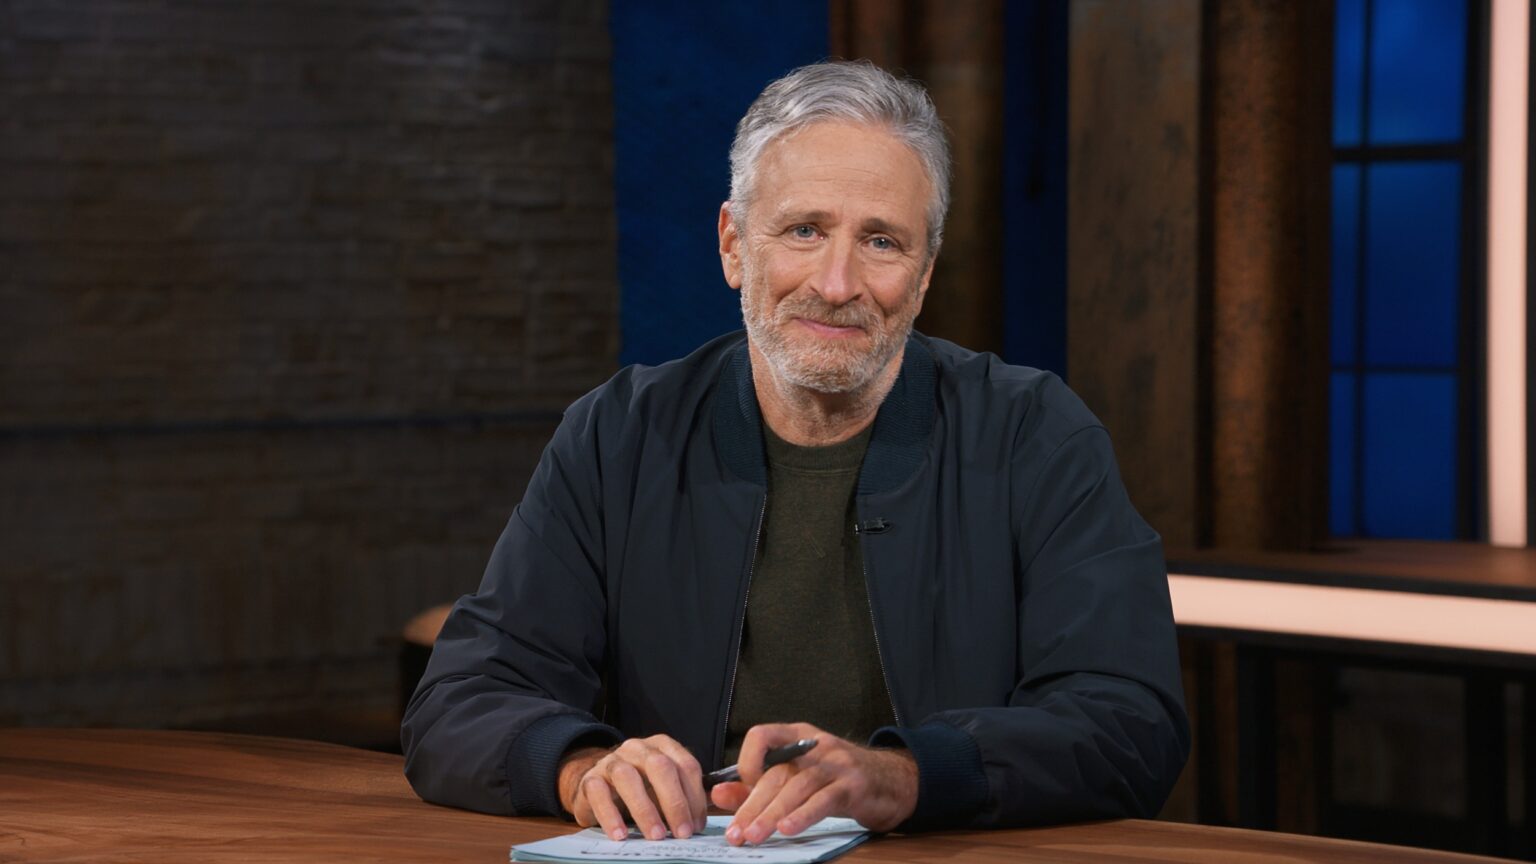 Apple TV+ unveiled the season 2 trailer Tuesday for the Emmy-nominated series The Problem With Jon Stewart. The show premieres Friday, October 7.